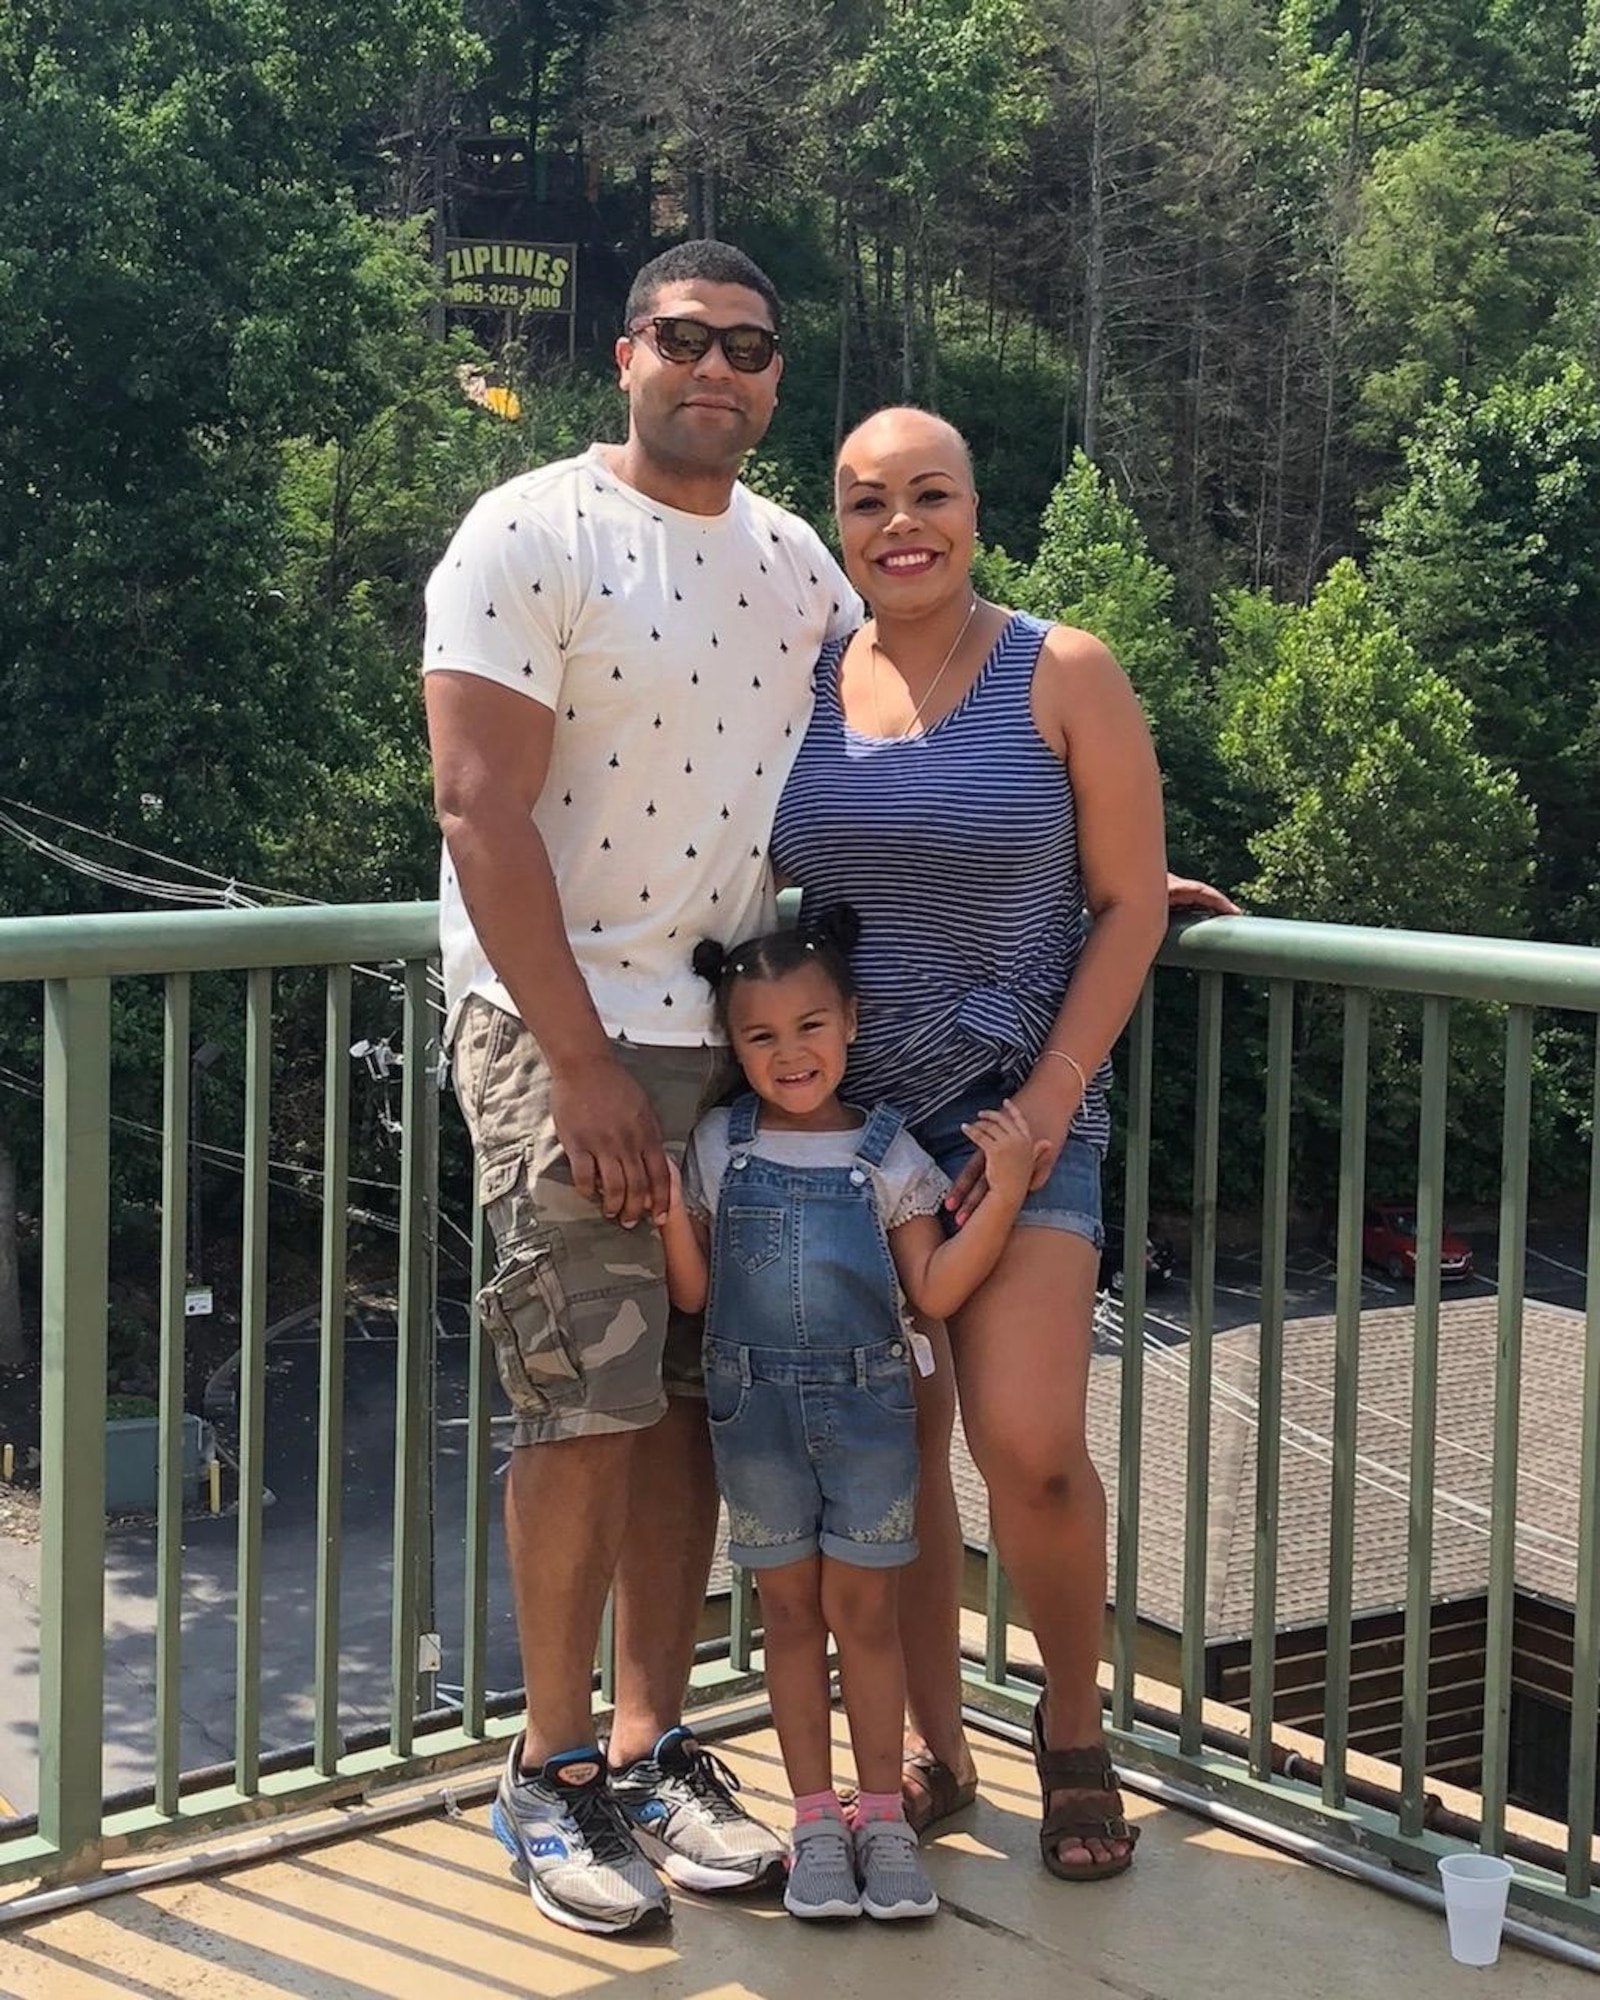 Martinez-Hernandez family takes first vacation to the Smokey Mountains after learning diagnosis. Family decides to continue to explore and travel to get the most out of life.